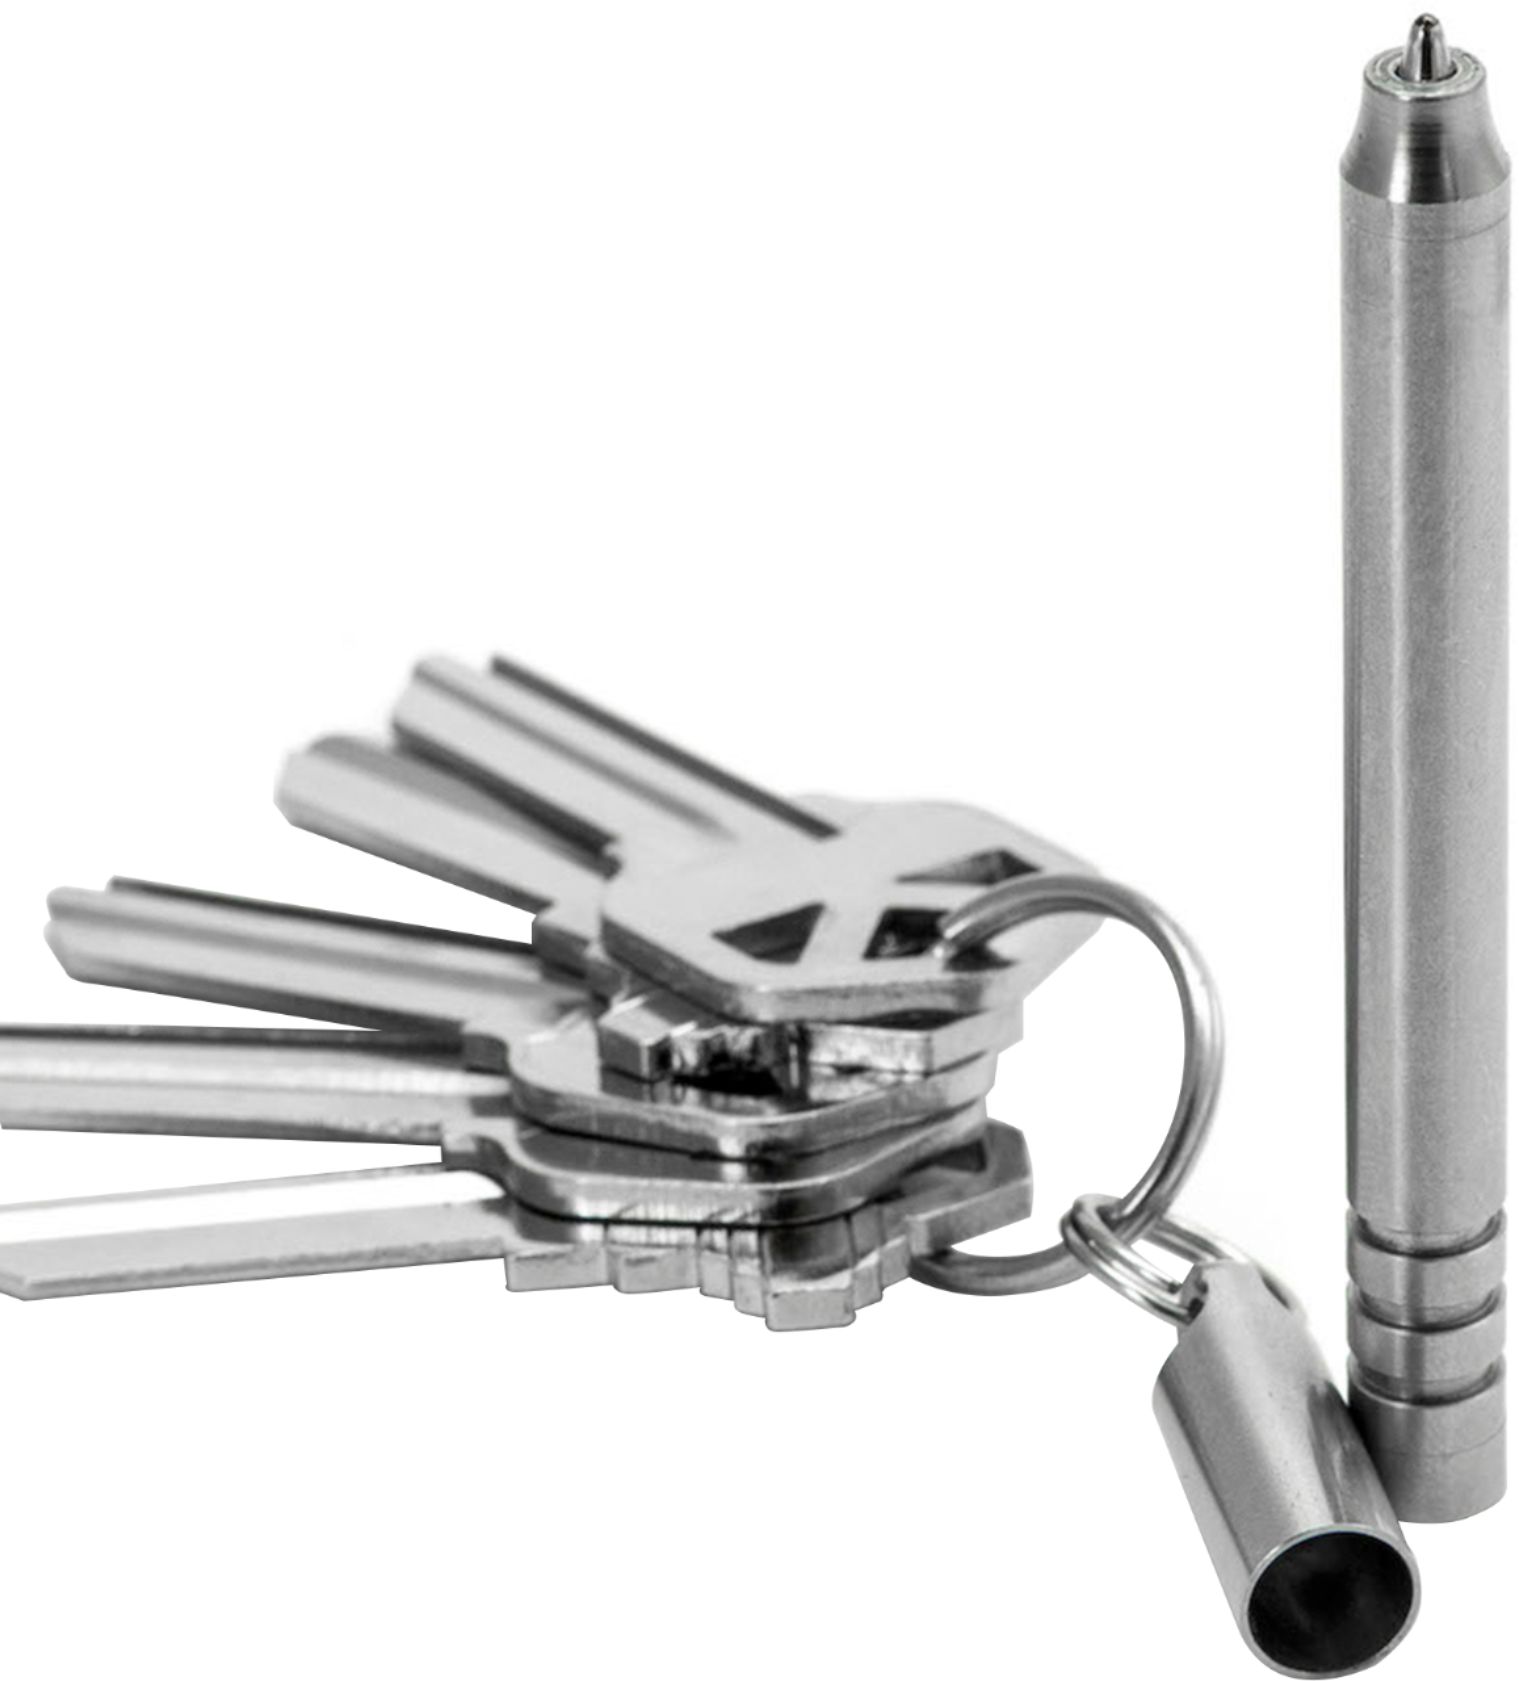 TelePen Telescoping Keychain Pen: Never be without a pen again.